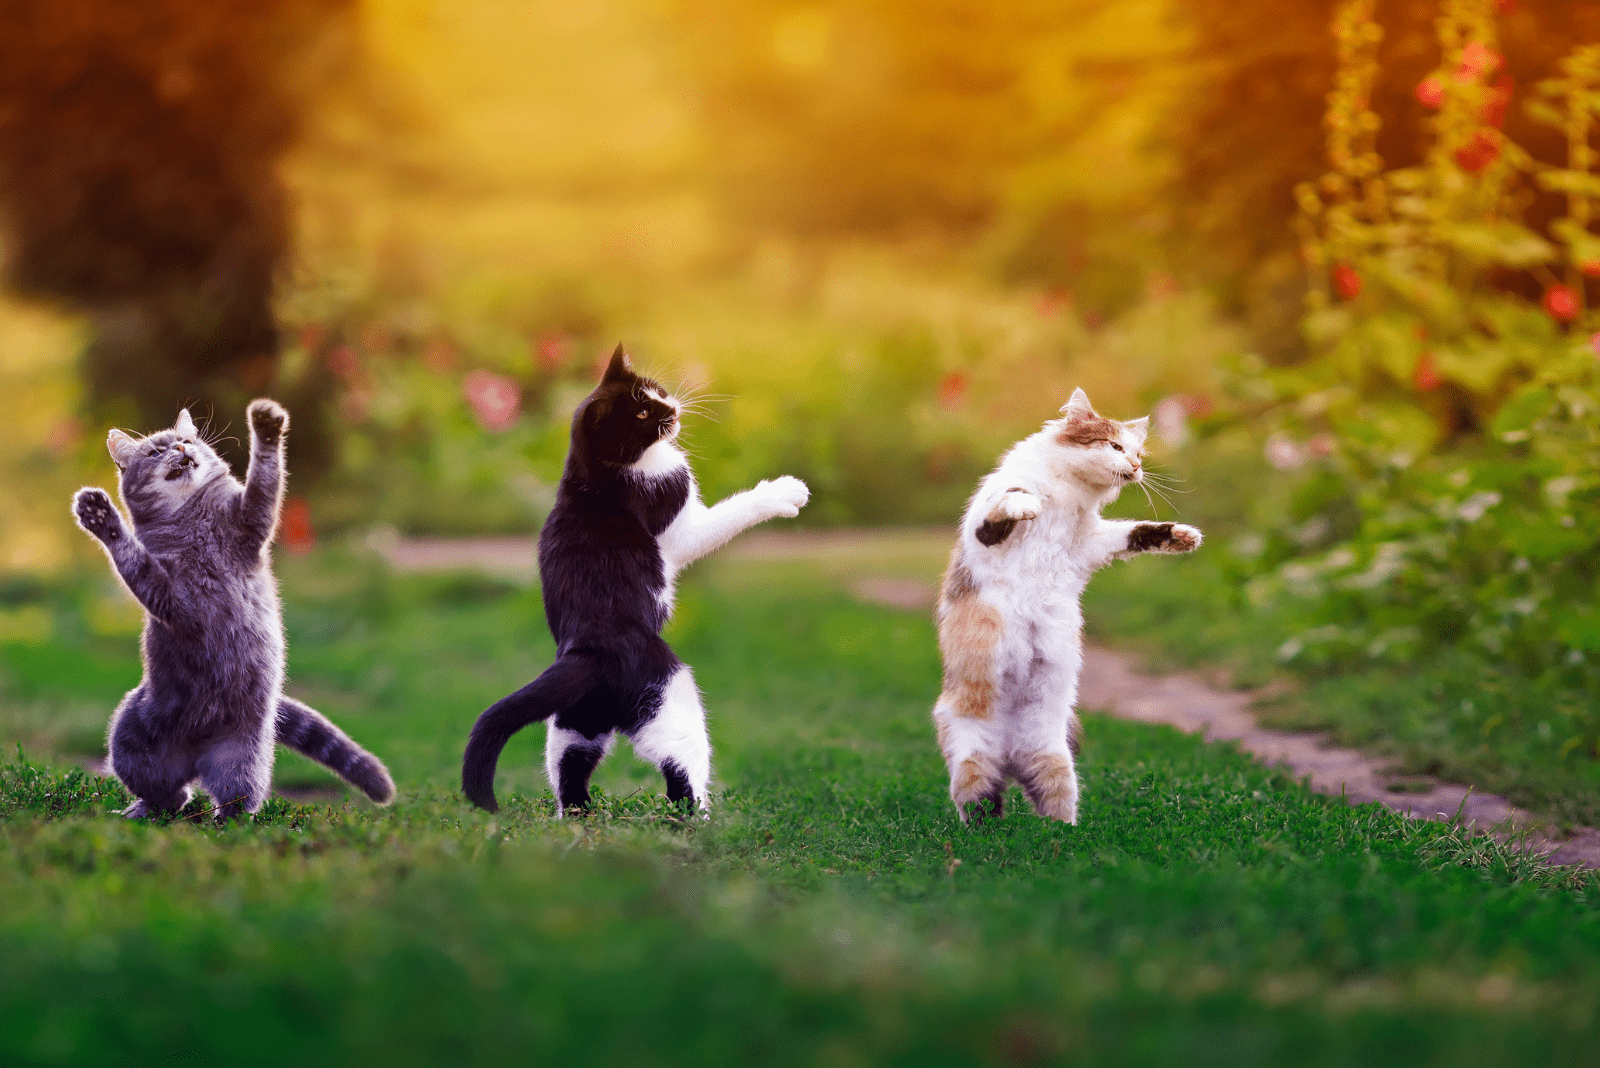 three cats are catching flies in the park having fun